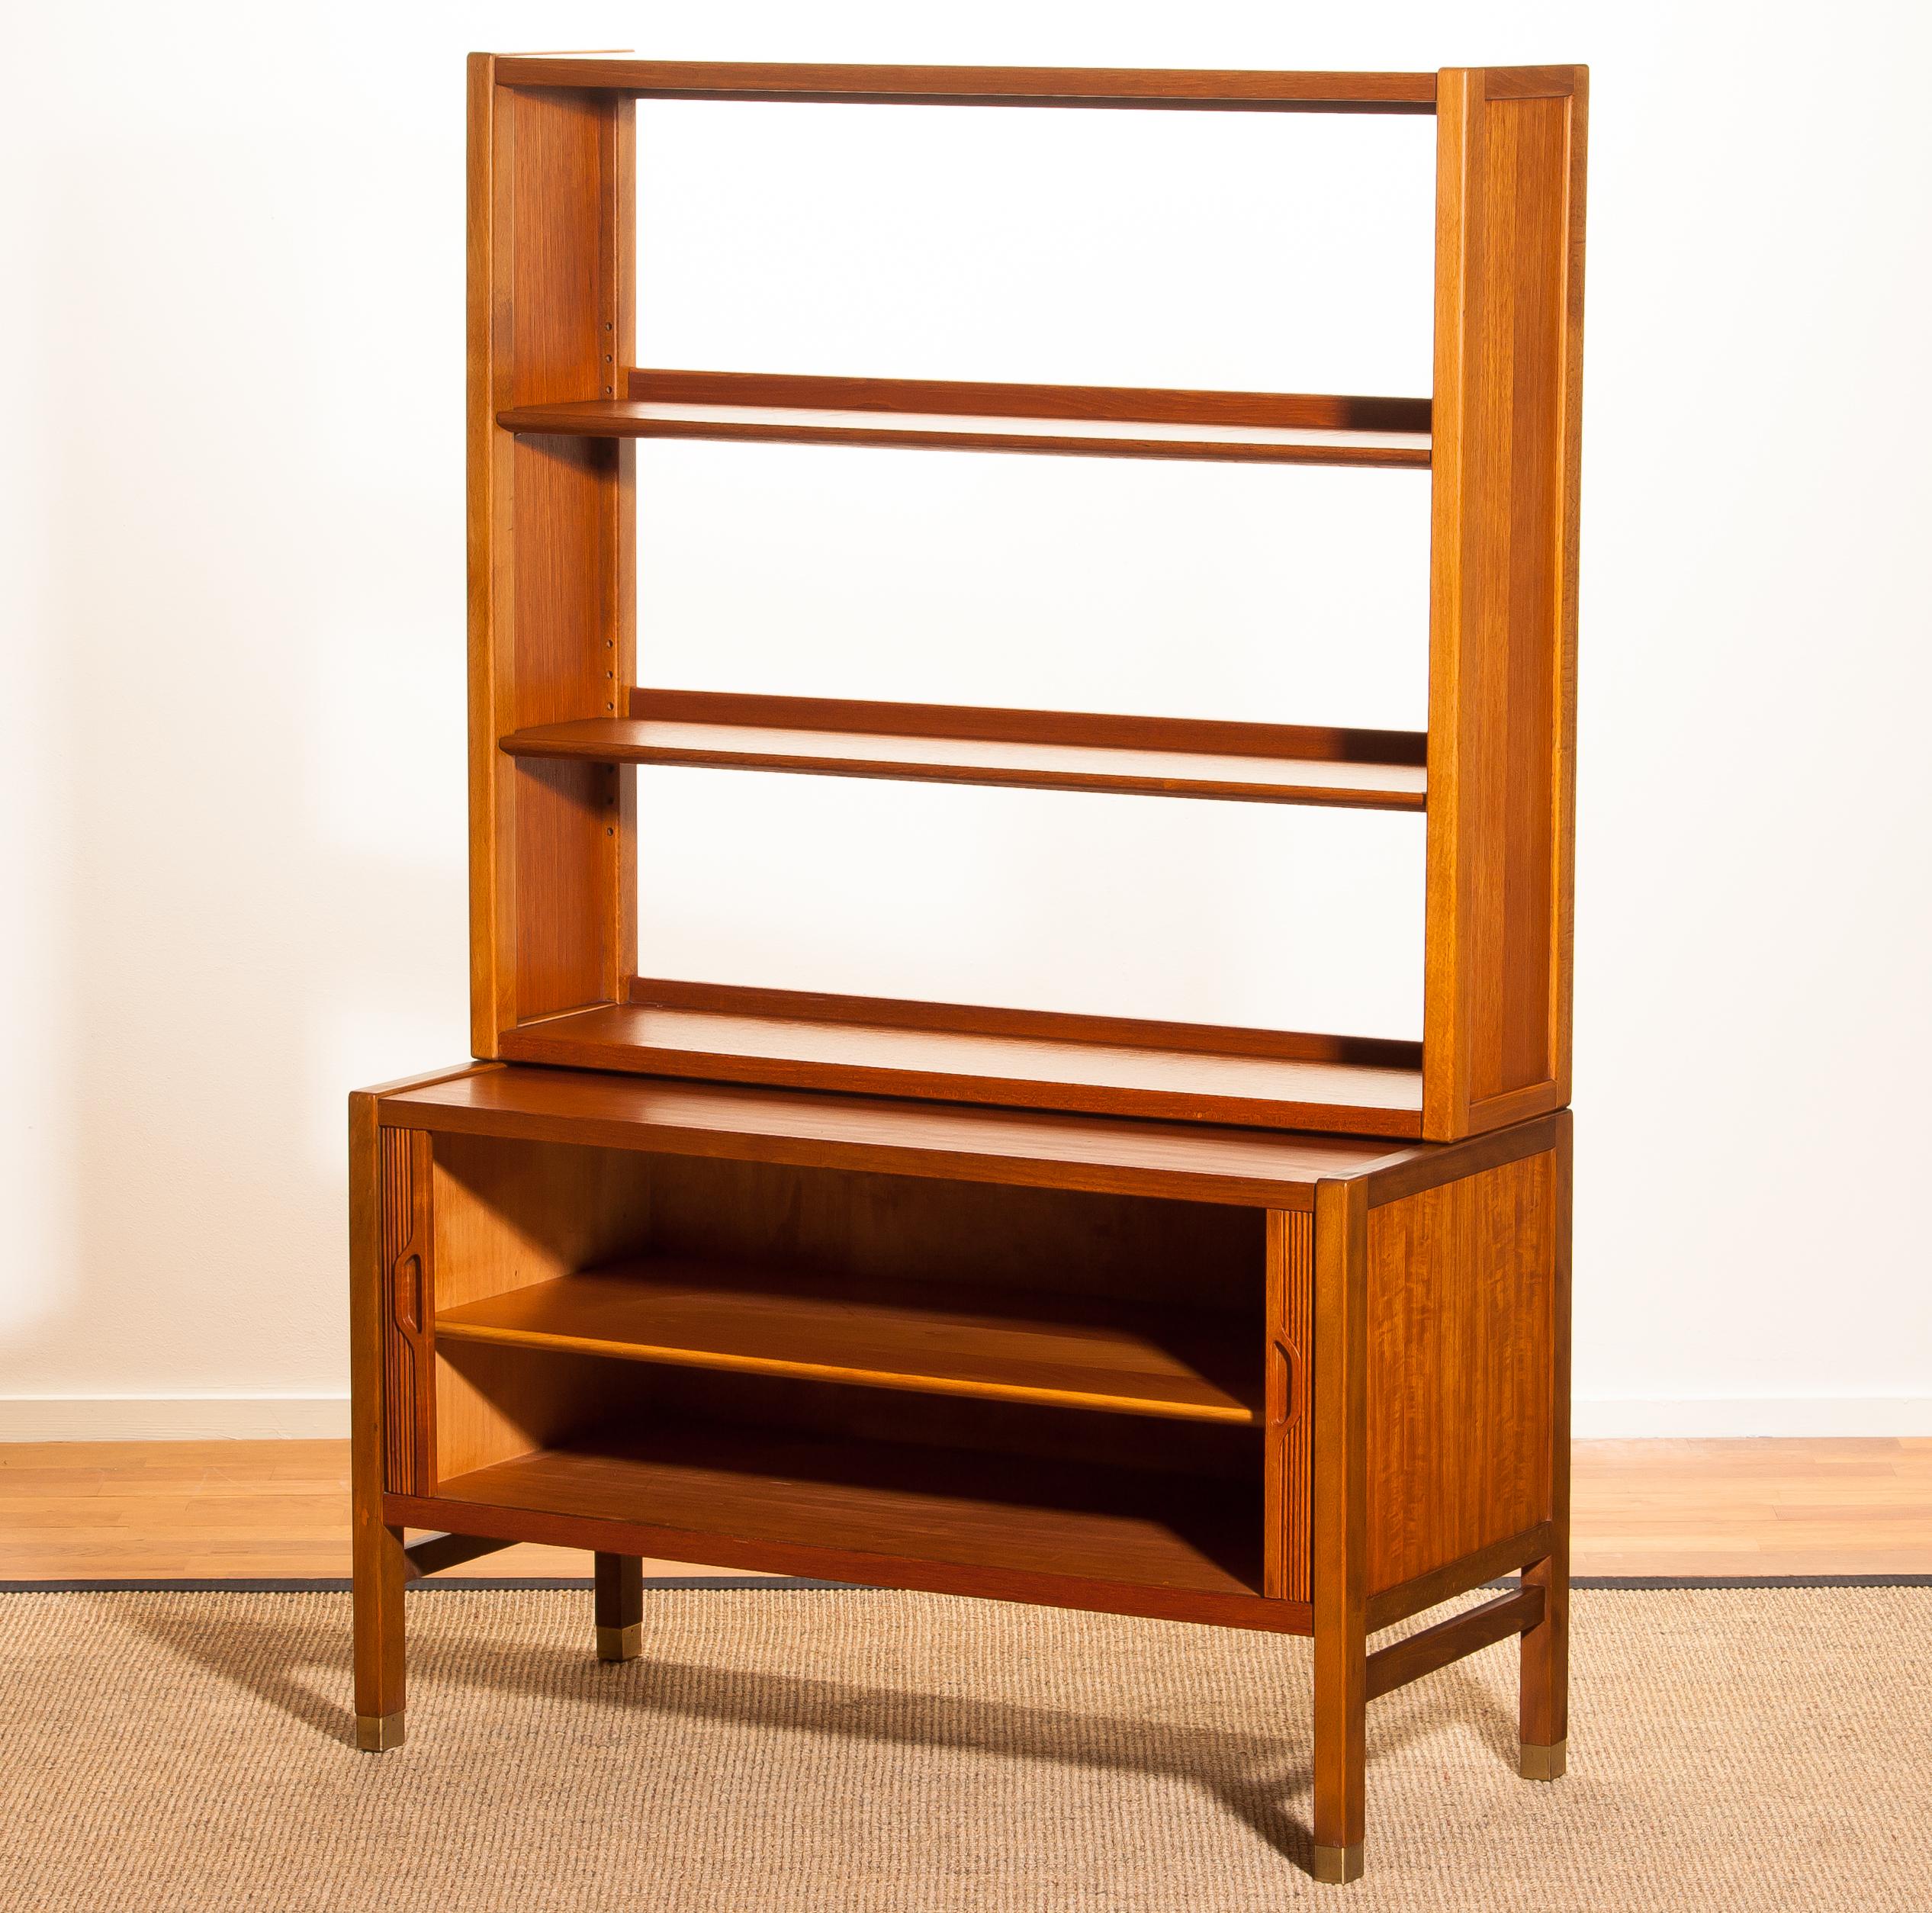 Mid-20th Century 1960s, Teak Tambour Bookcase Cabinet by Carl Aksel Acking for Bodafors, Sweden